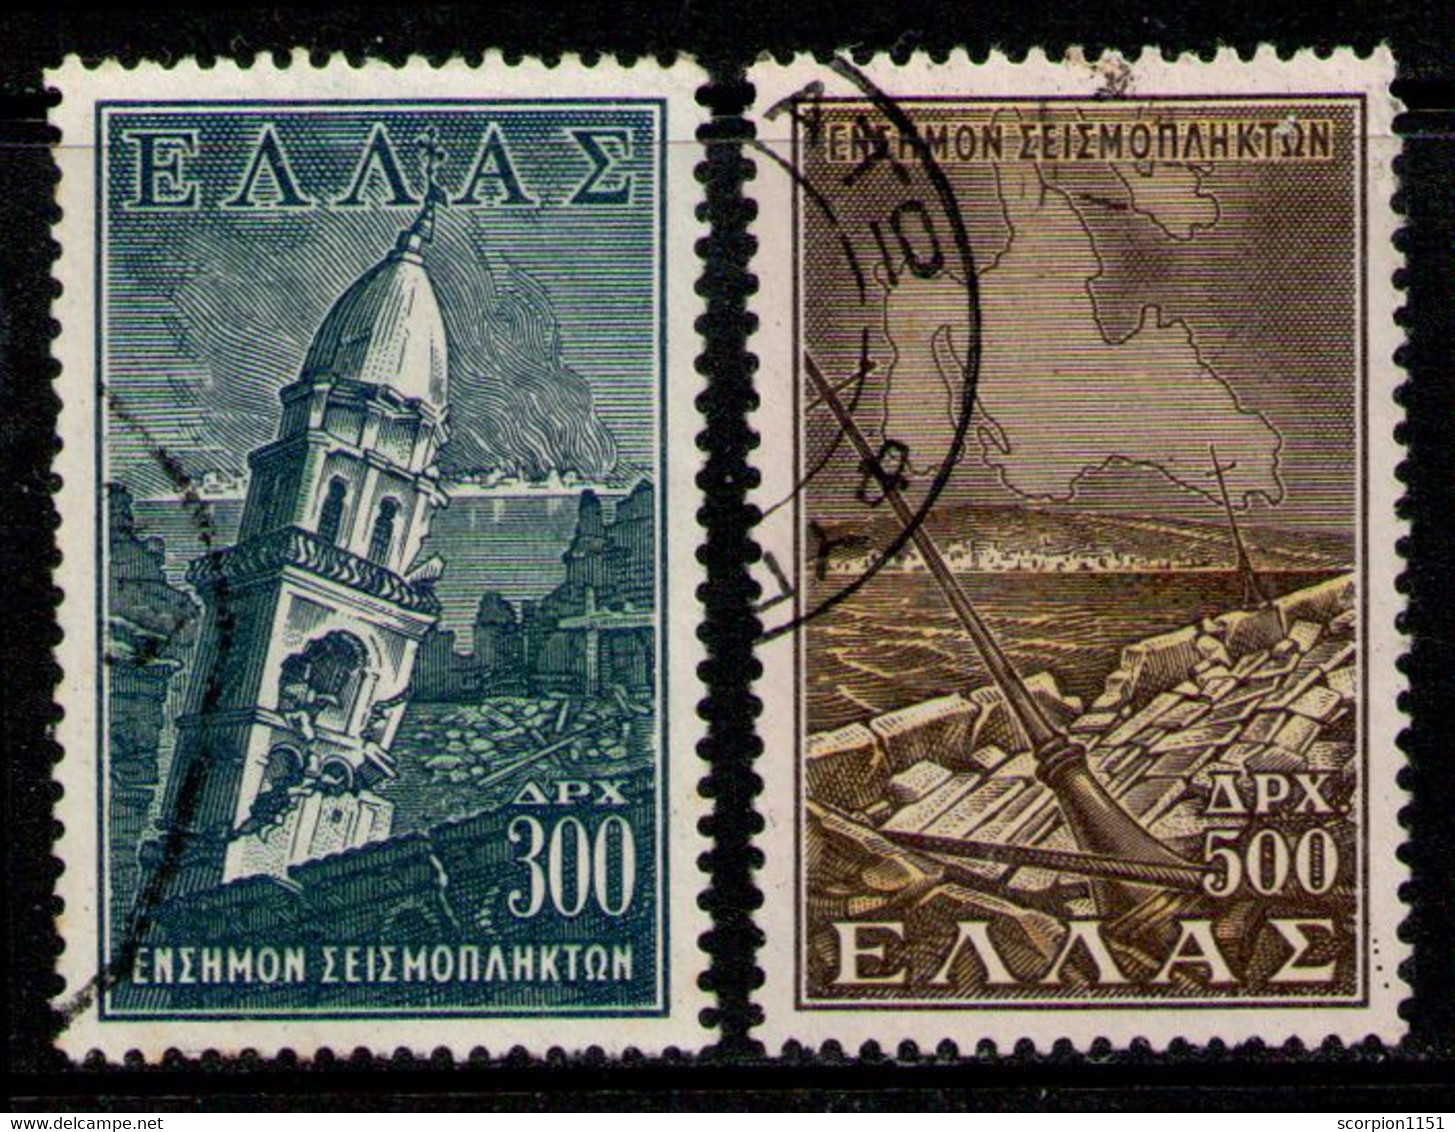 GREECE 1951/52 - Set Used - Charity Issues